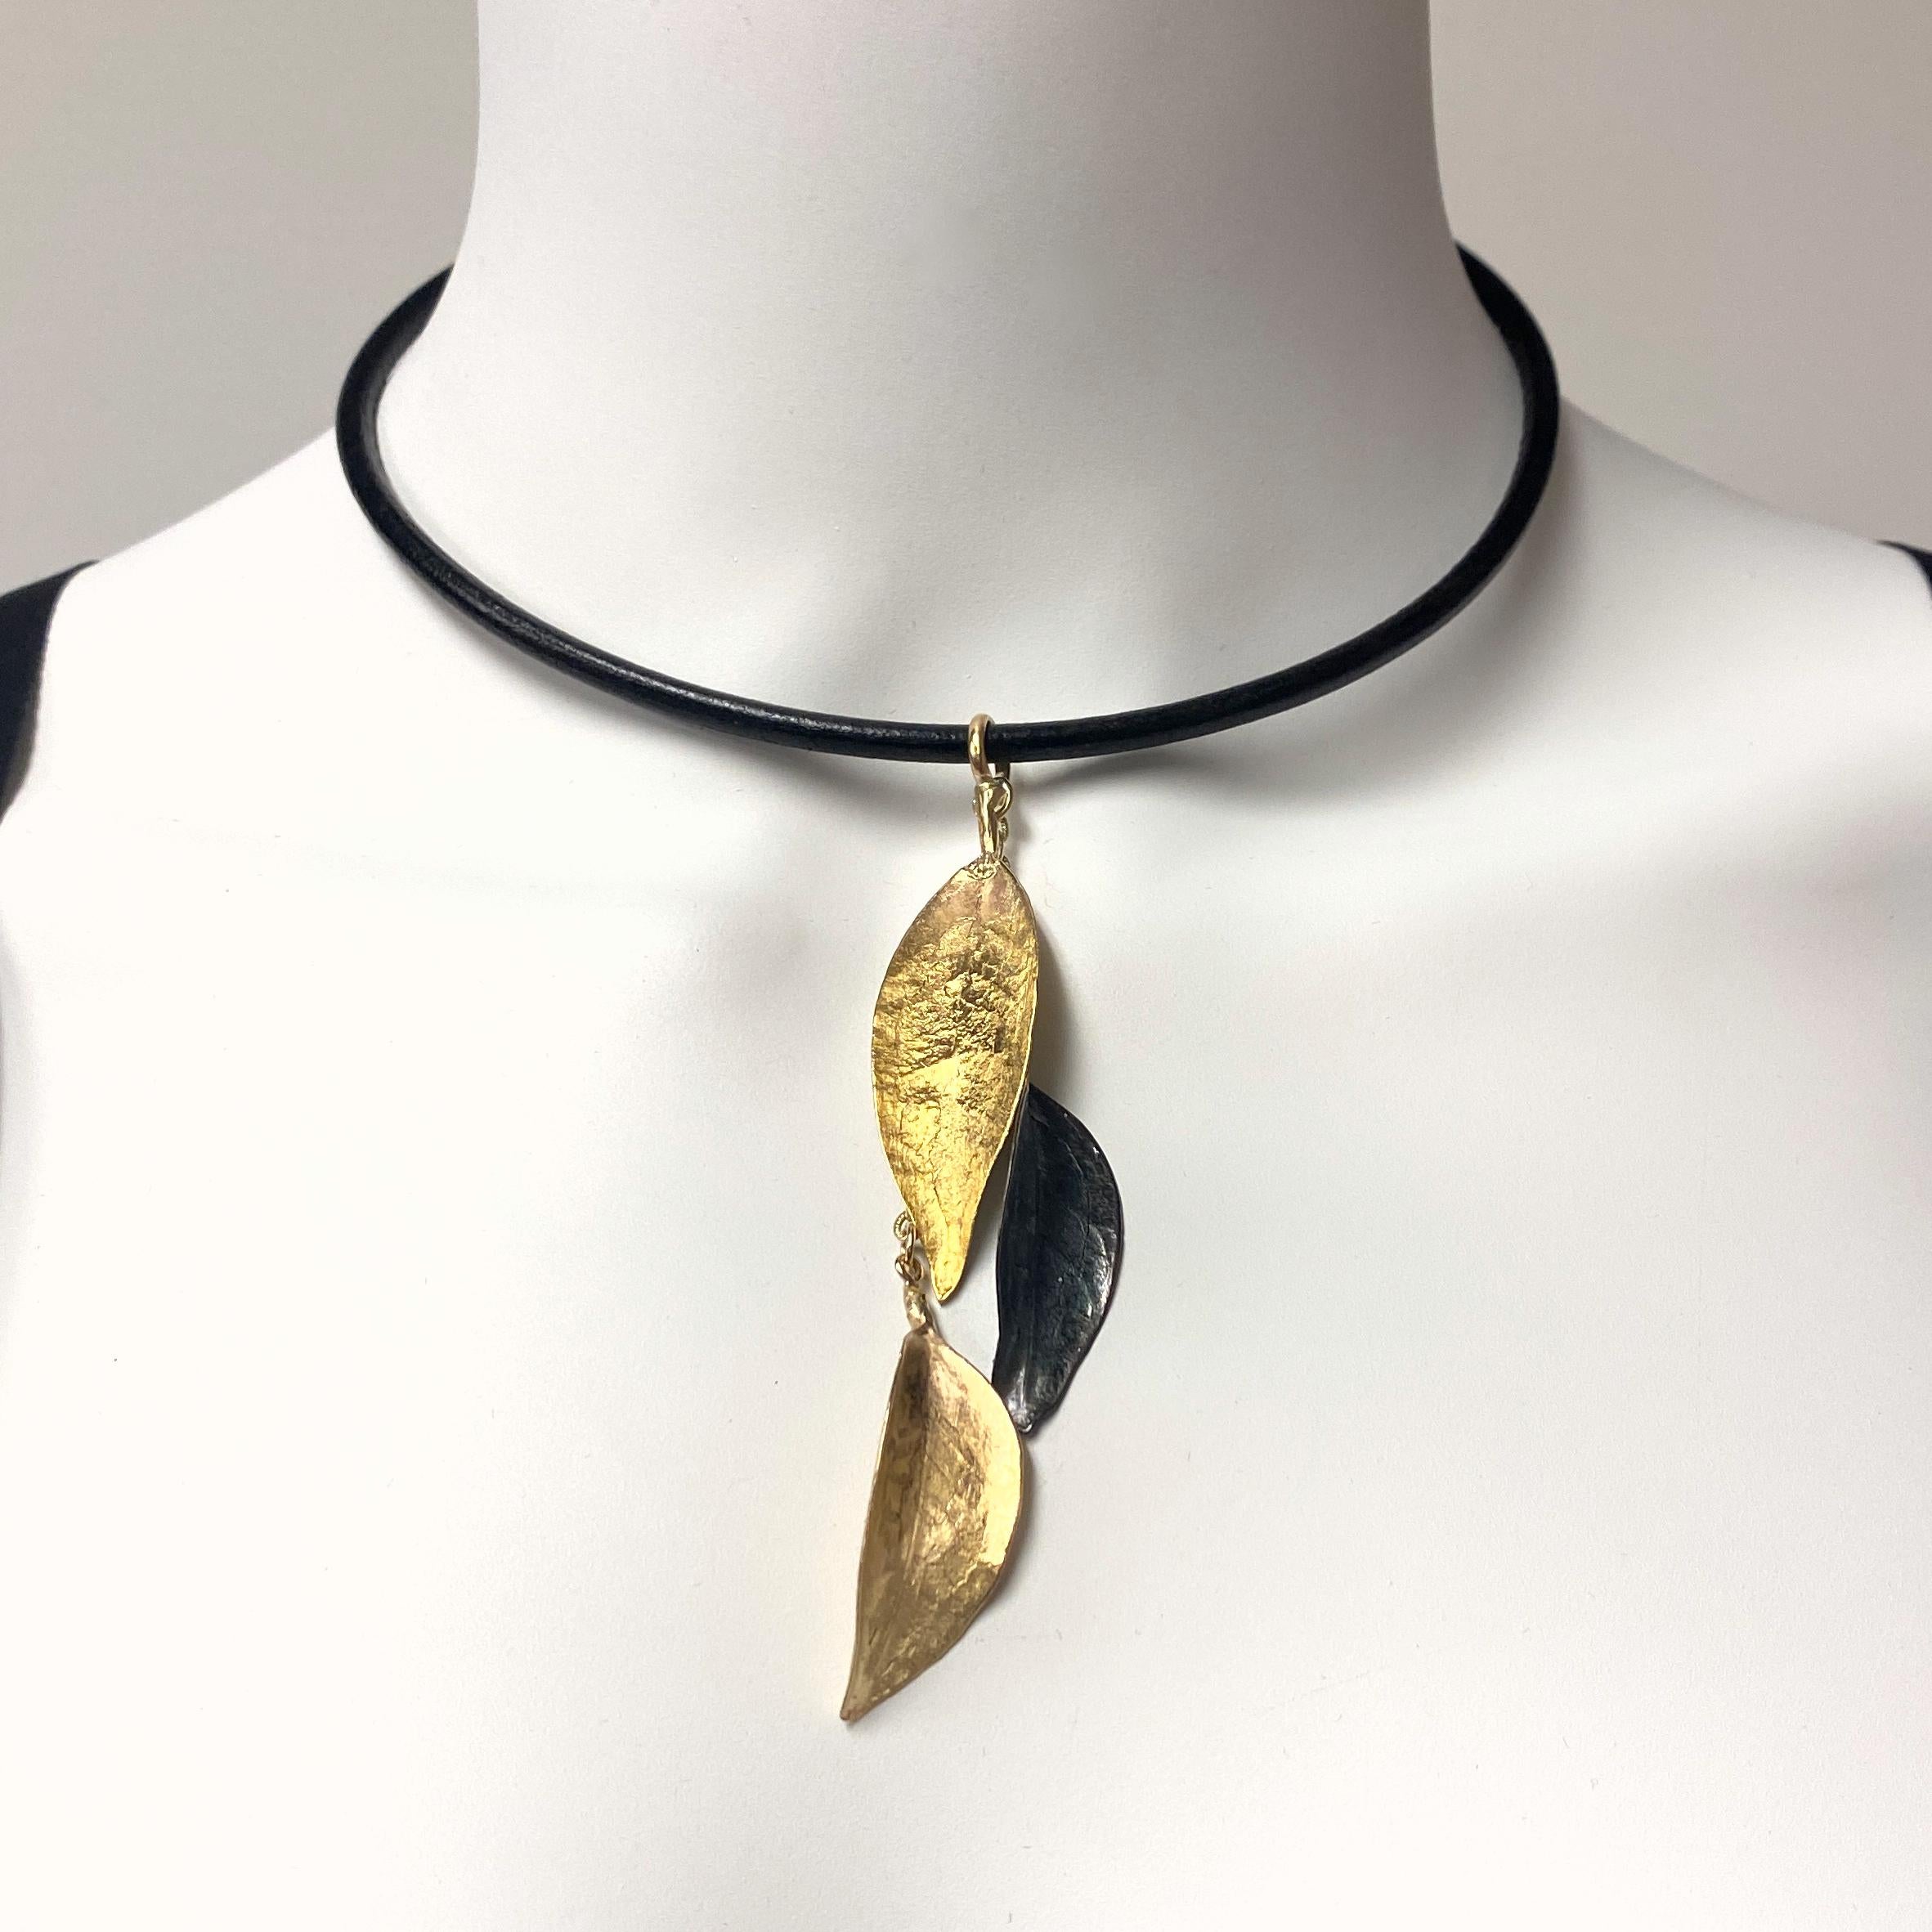 Eytan Brandes used actual leaves to make the wax molds for these leaves, so they're whisper-thin and super-lightweight.  All three leaves are 14 karat gold, but with different finishes.  

The center leaf has been oxidized black.  The top leaf is 14